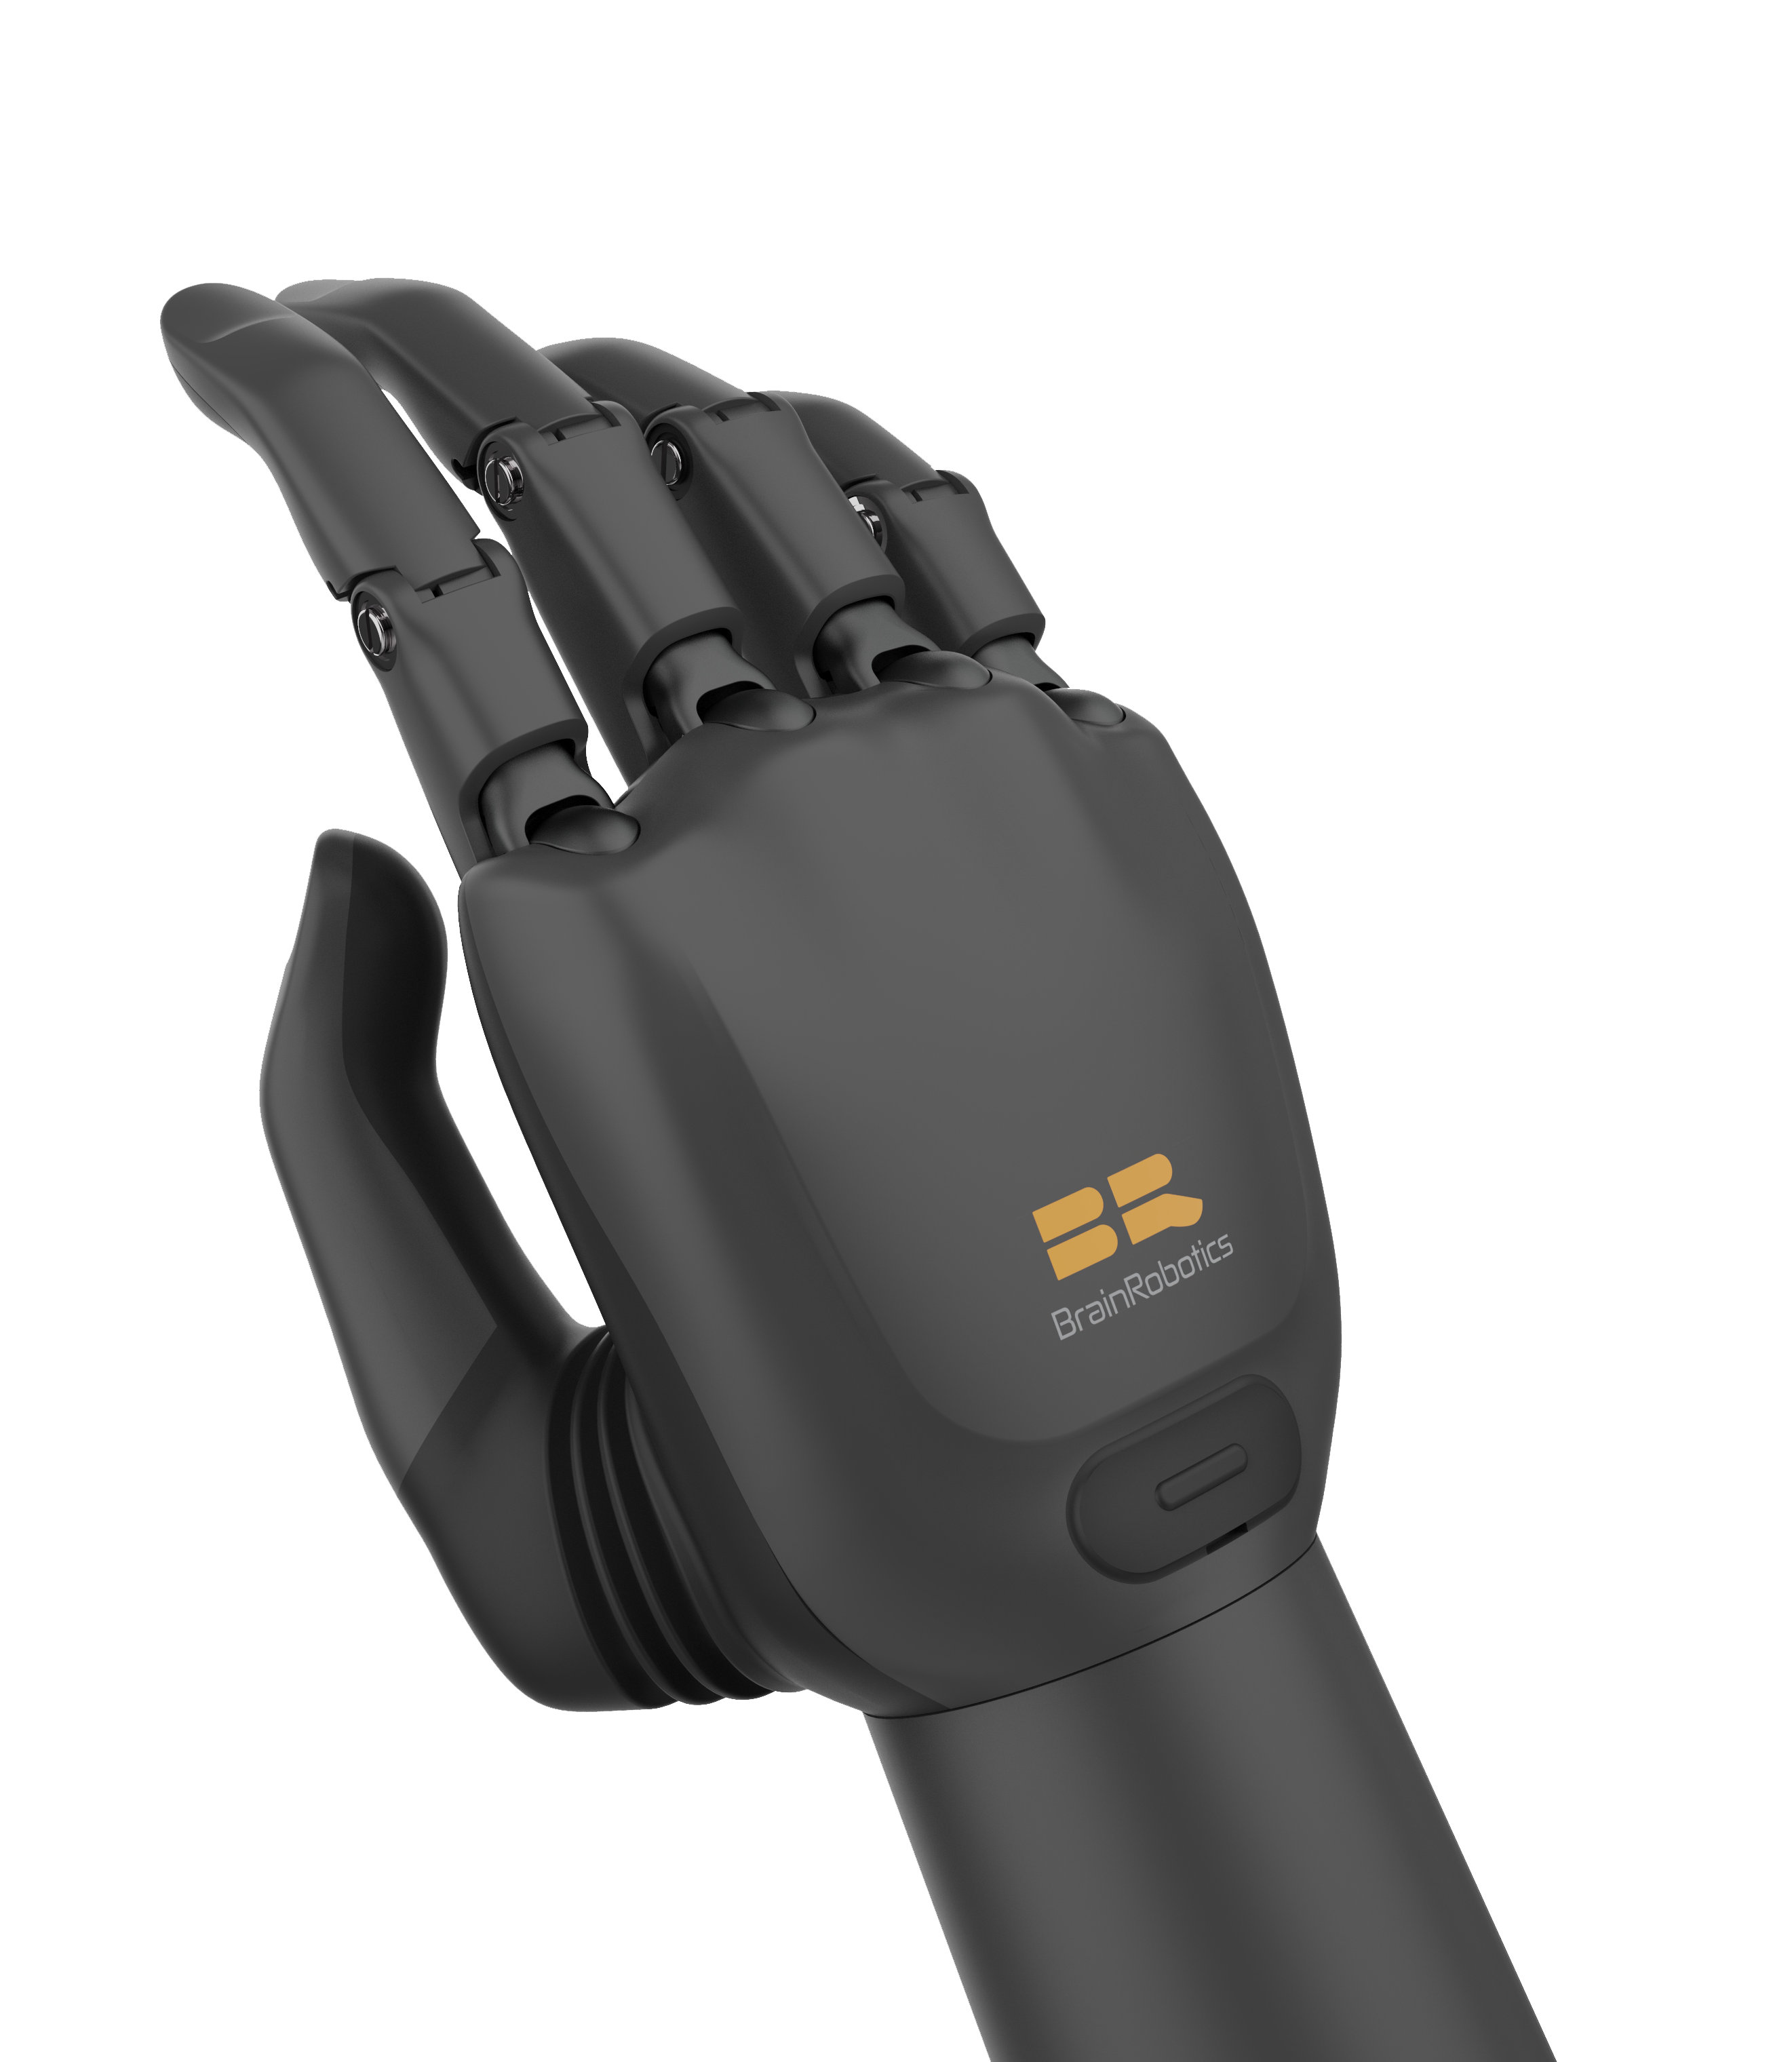 BrainCo Announces FDA Approval Process for a More Affordable Smart Prosthetic Hand